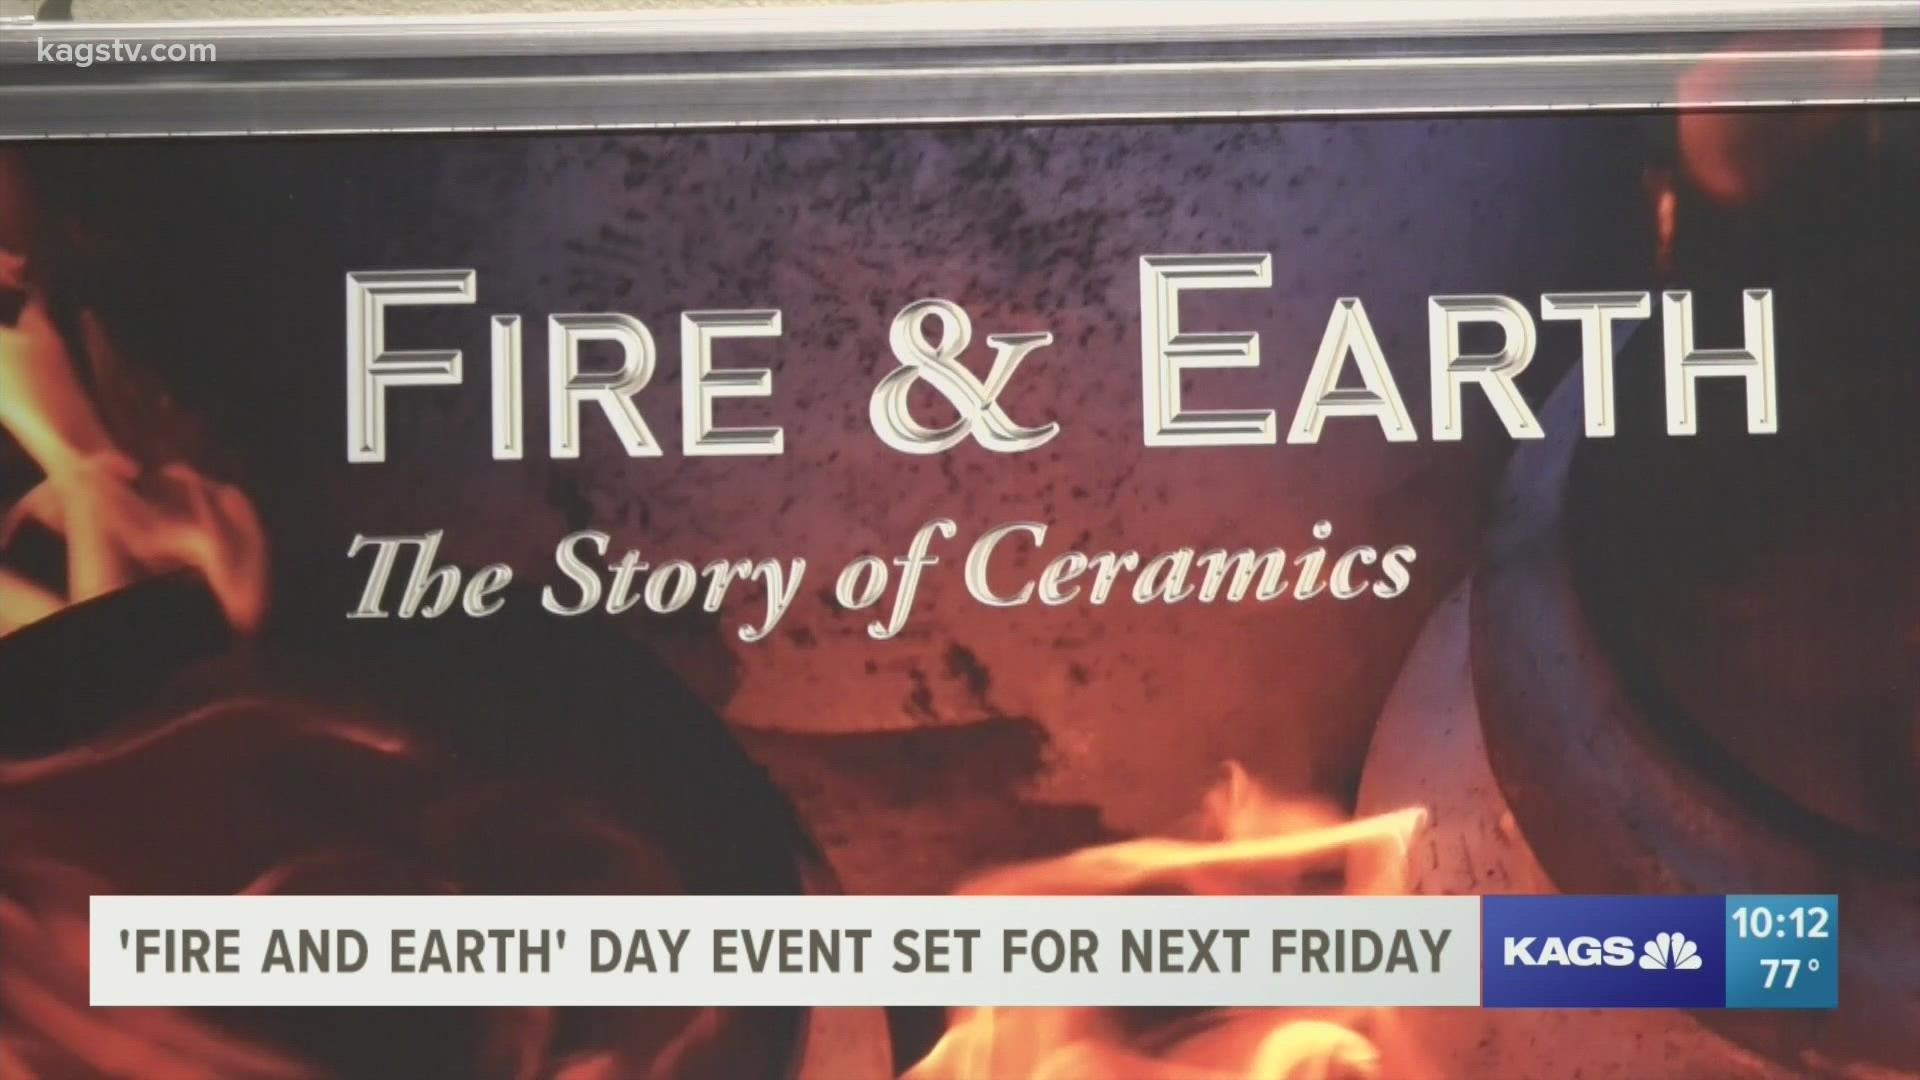 The museum will be holding a Fire and Earth Day celebration to remind people not to take advantage of our natural resources.